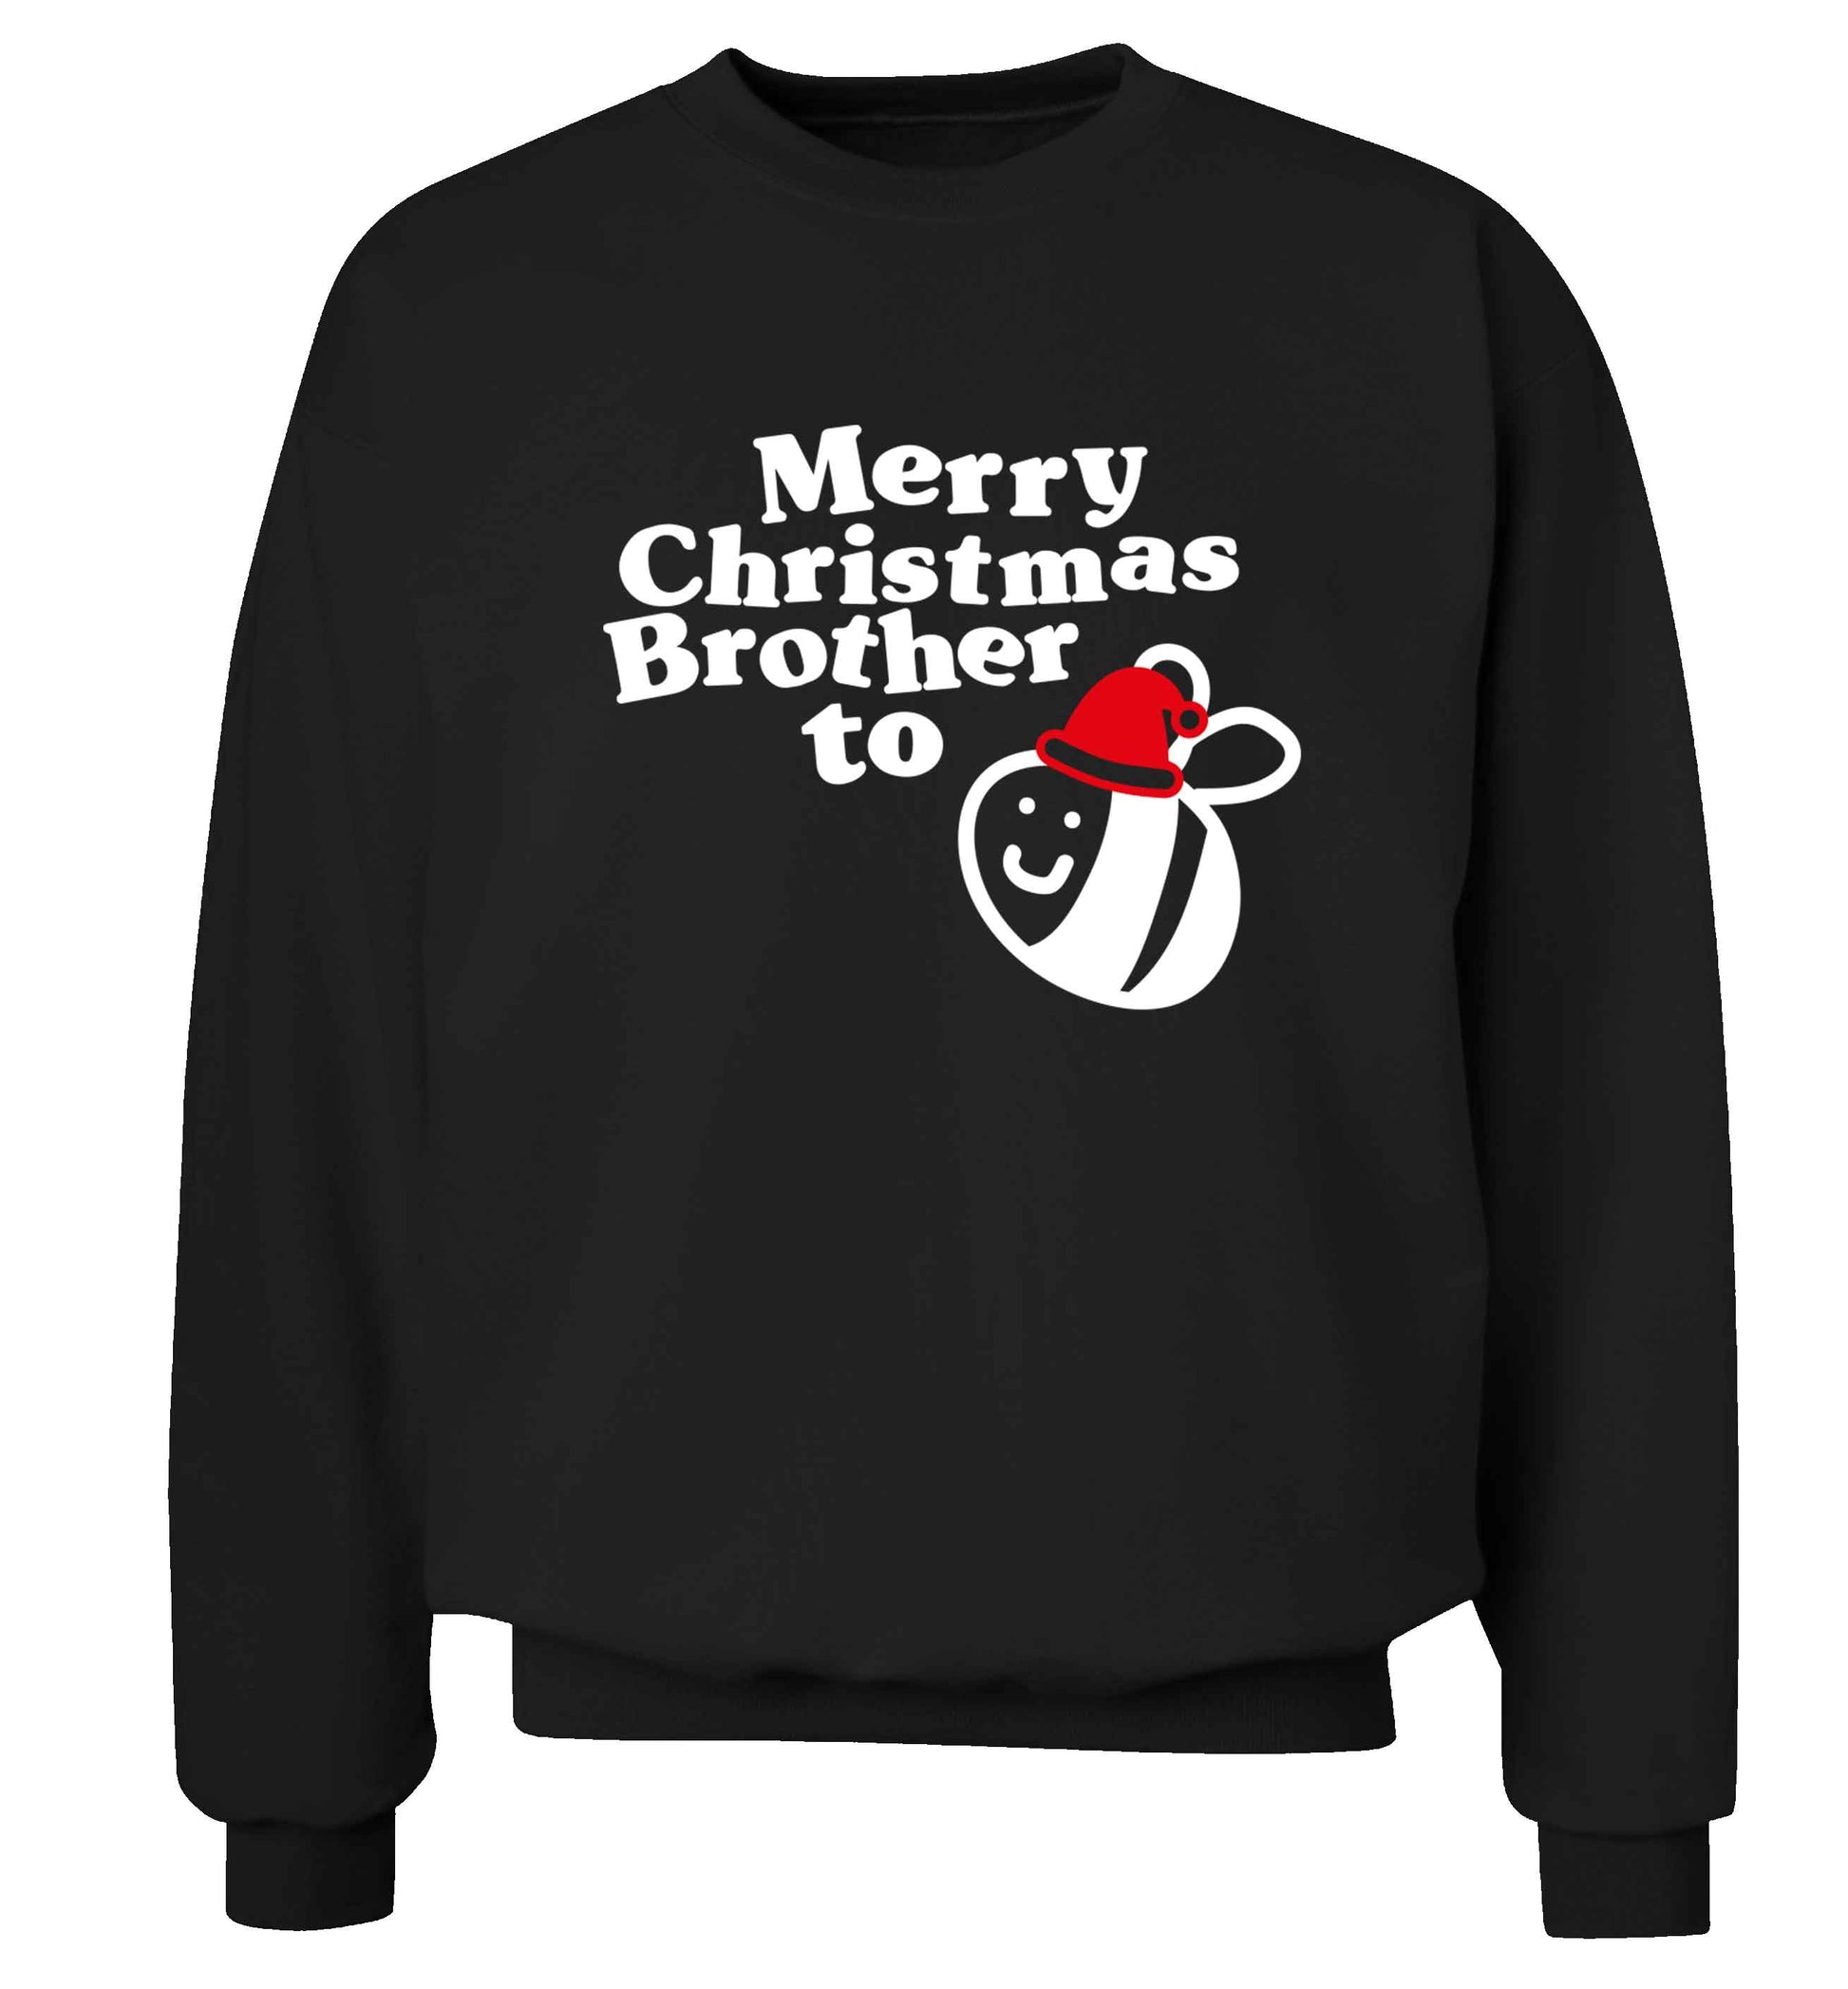 Merry Christmas brother to be Adult's unisex black Sweater 2XL